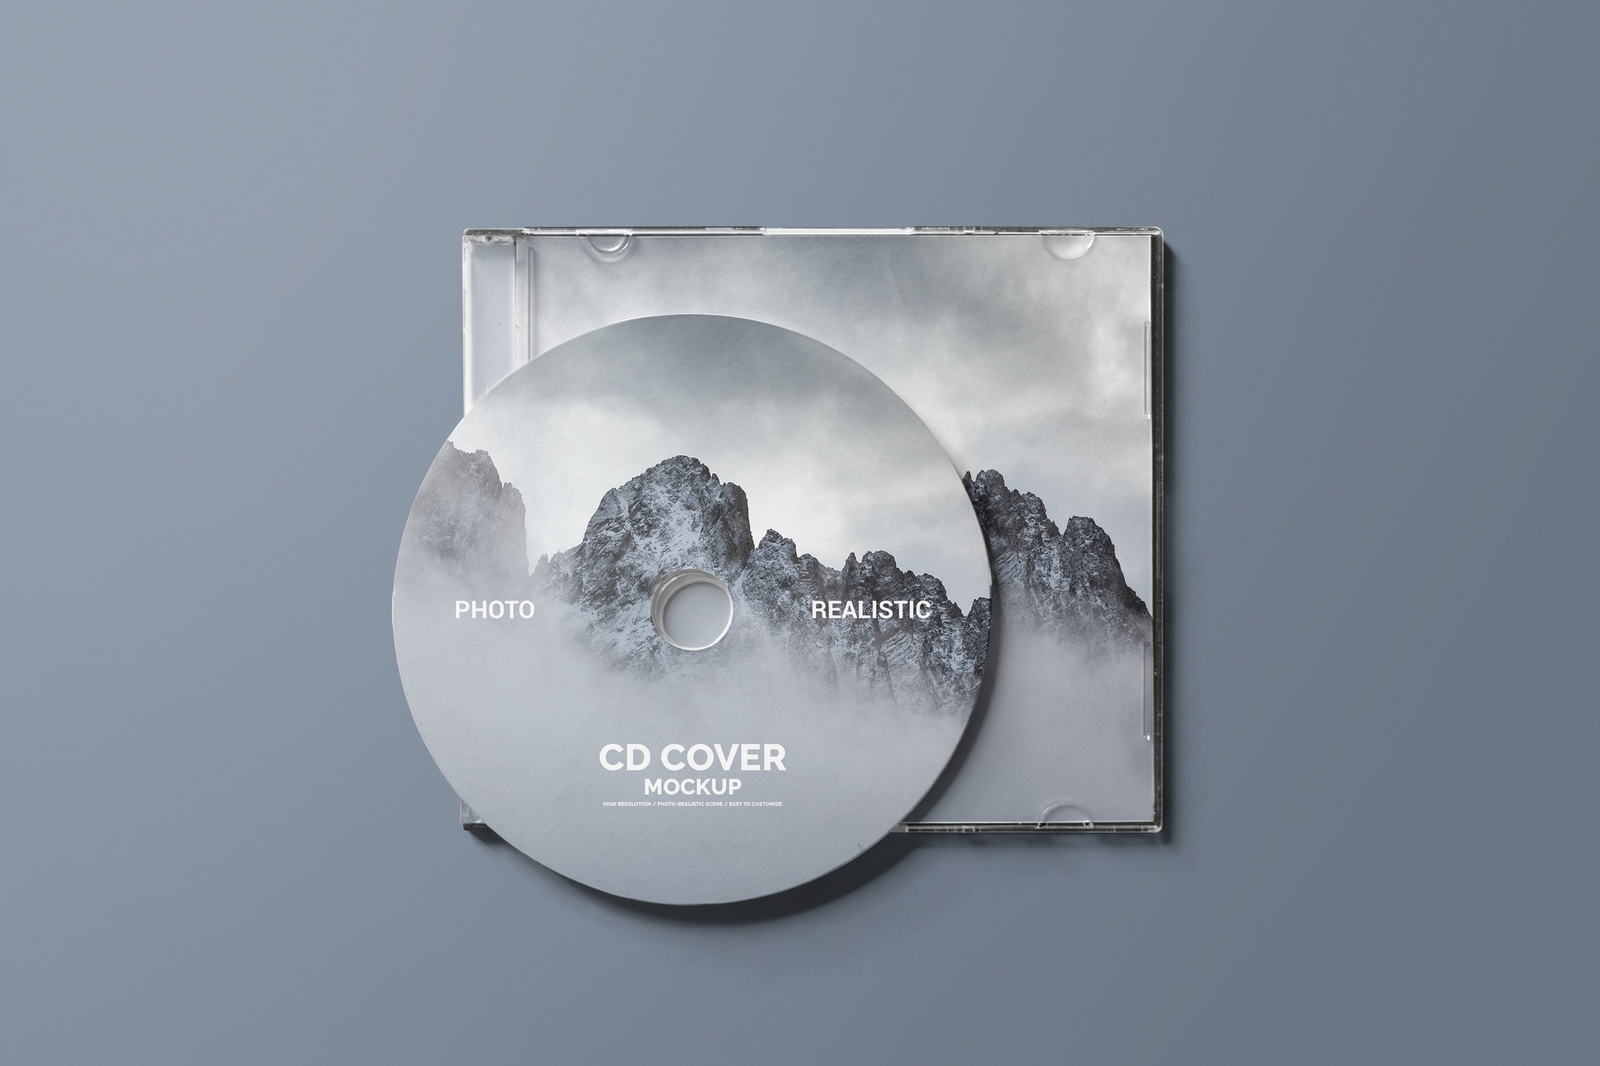 Download CD Cover Mockup in Packaging Mockups on Yellow Images ...